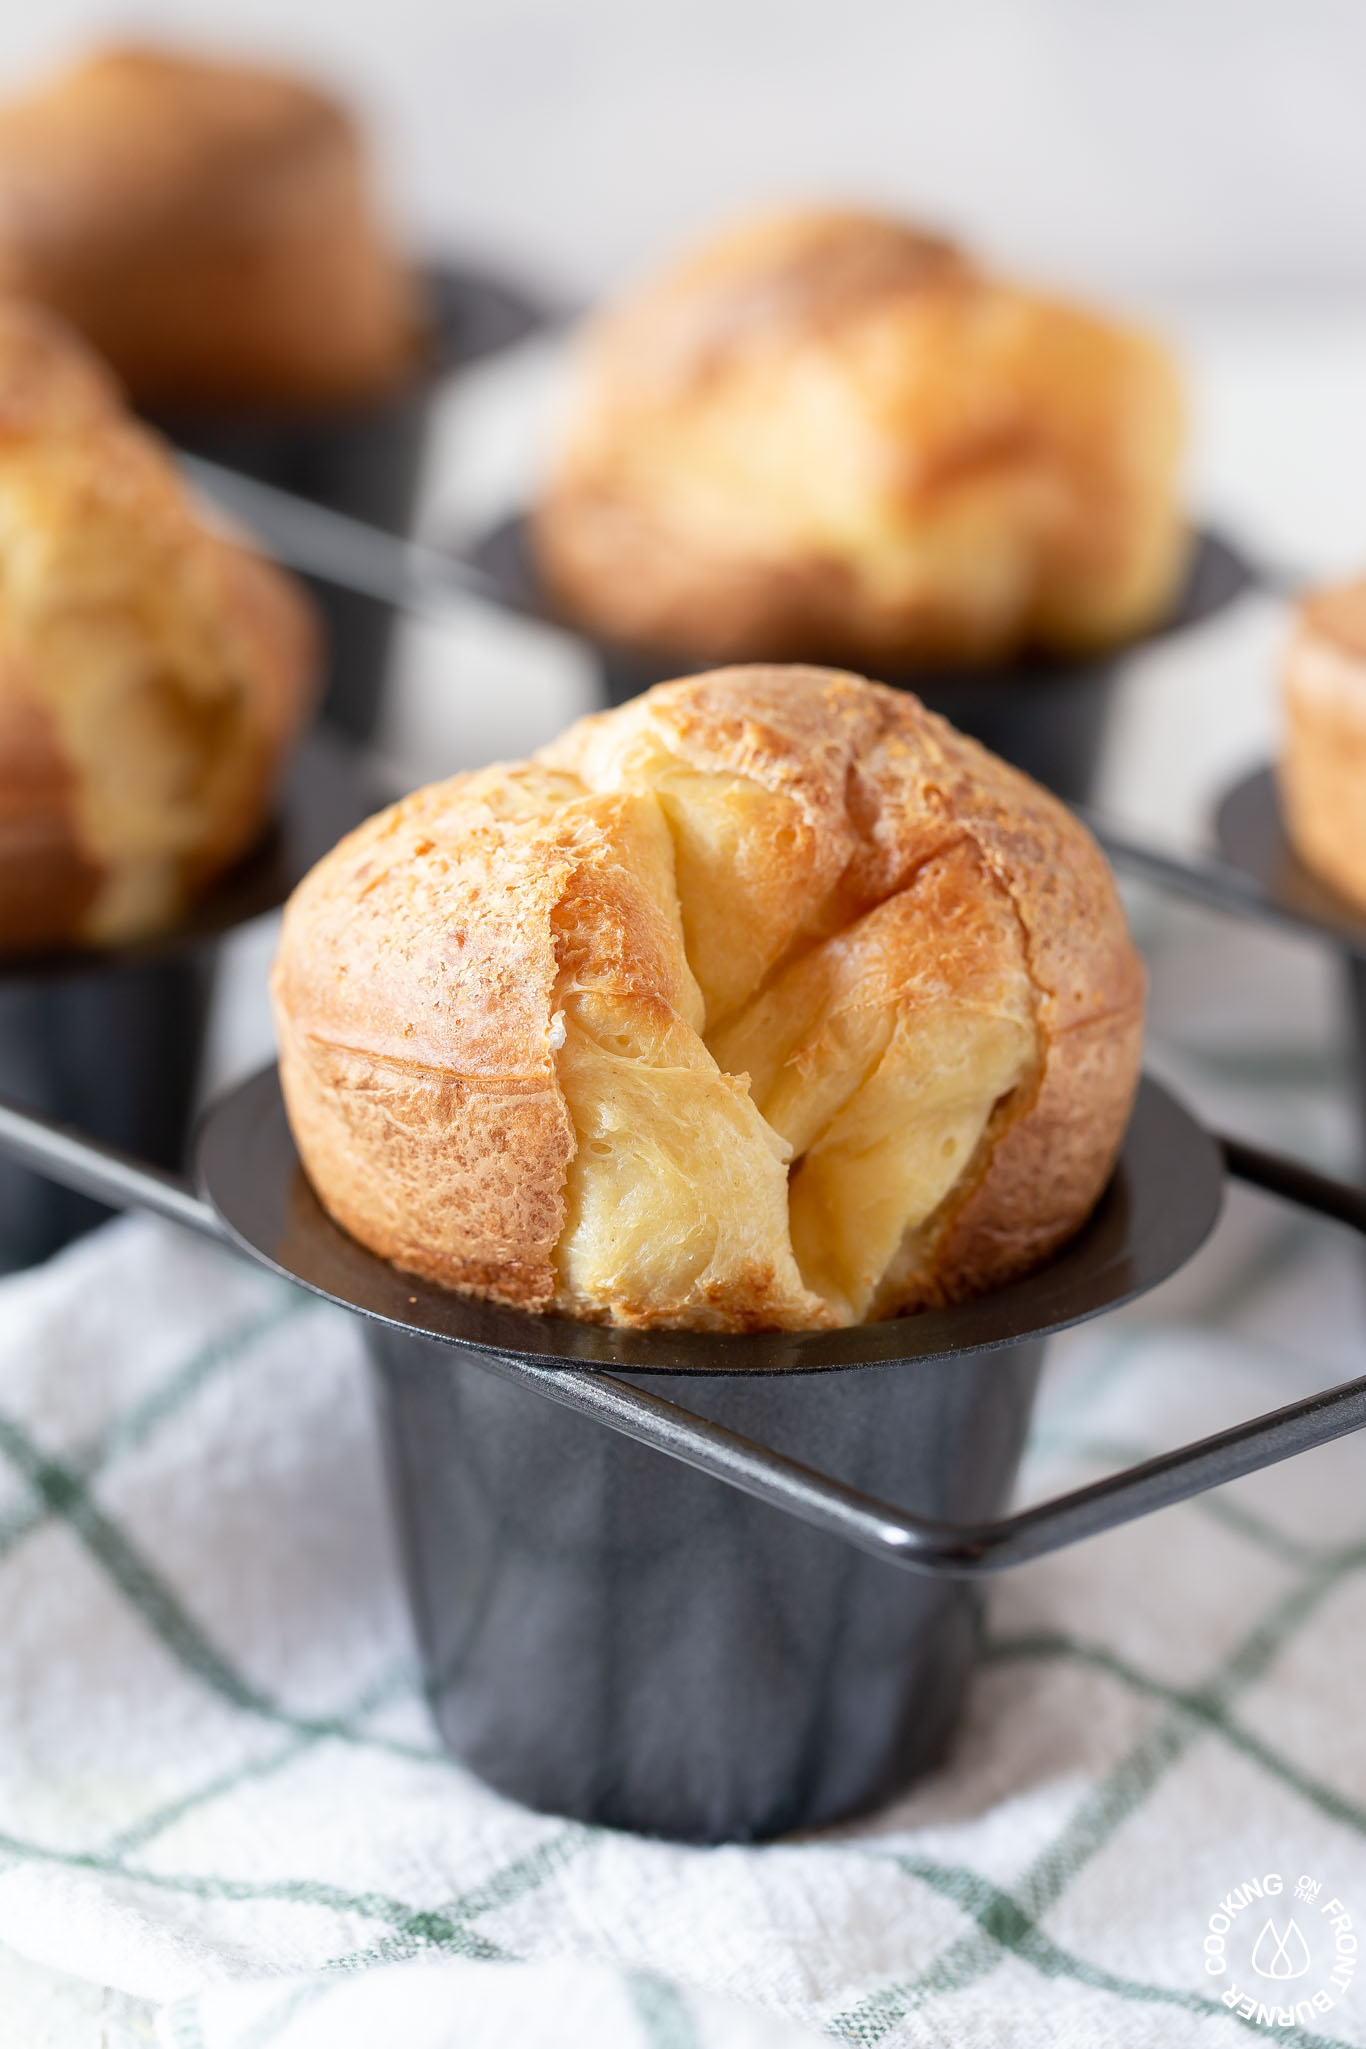 https://www.cookingonthefrontburners.com/wp-content/uploads/2019/07/Easy-Classic-Popovers-1.jpg